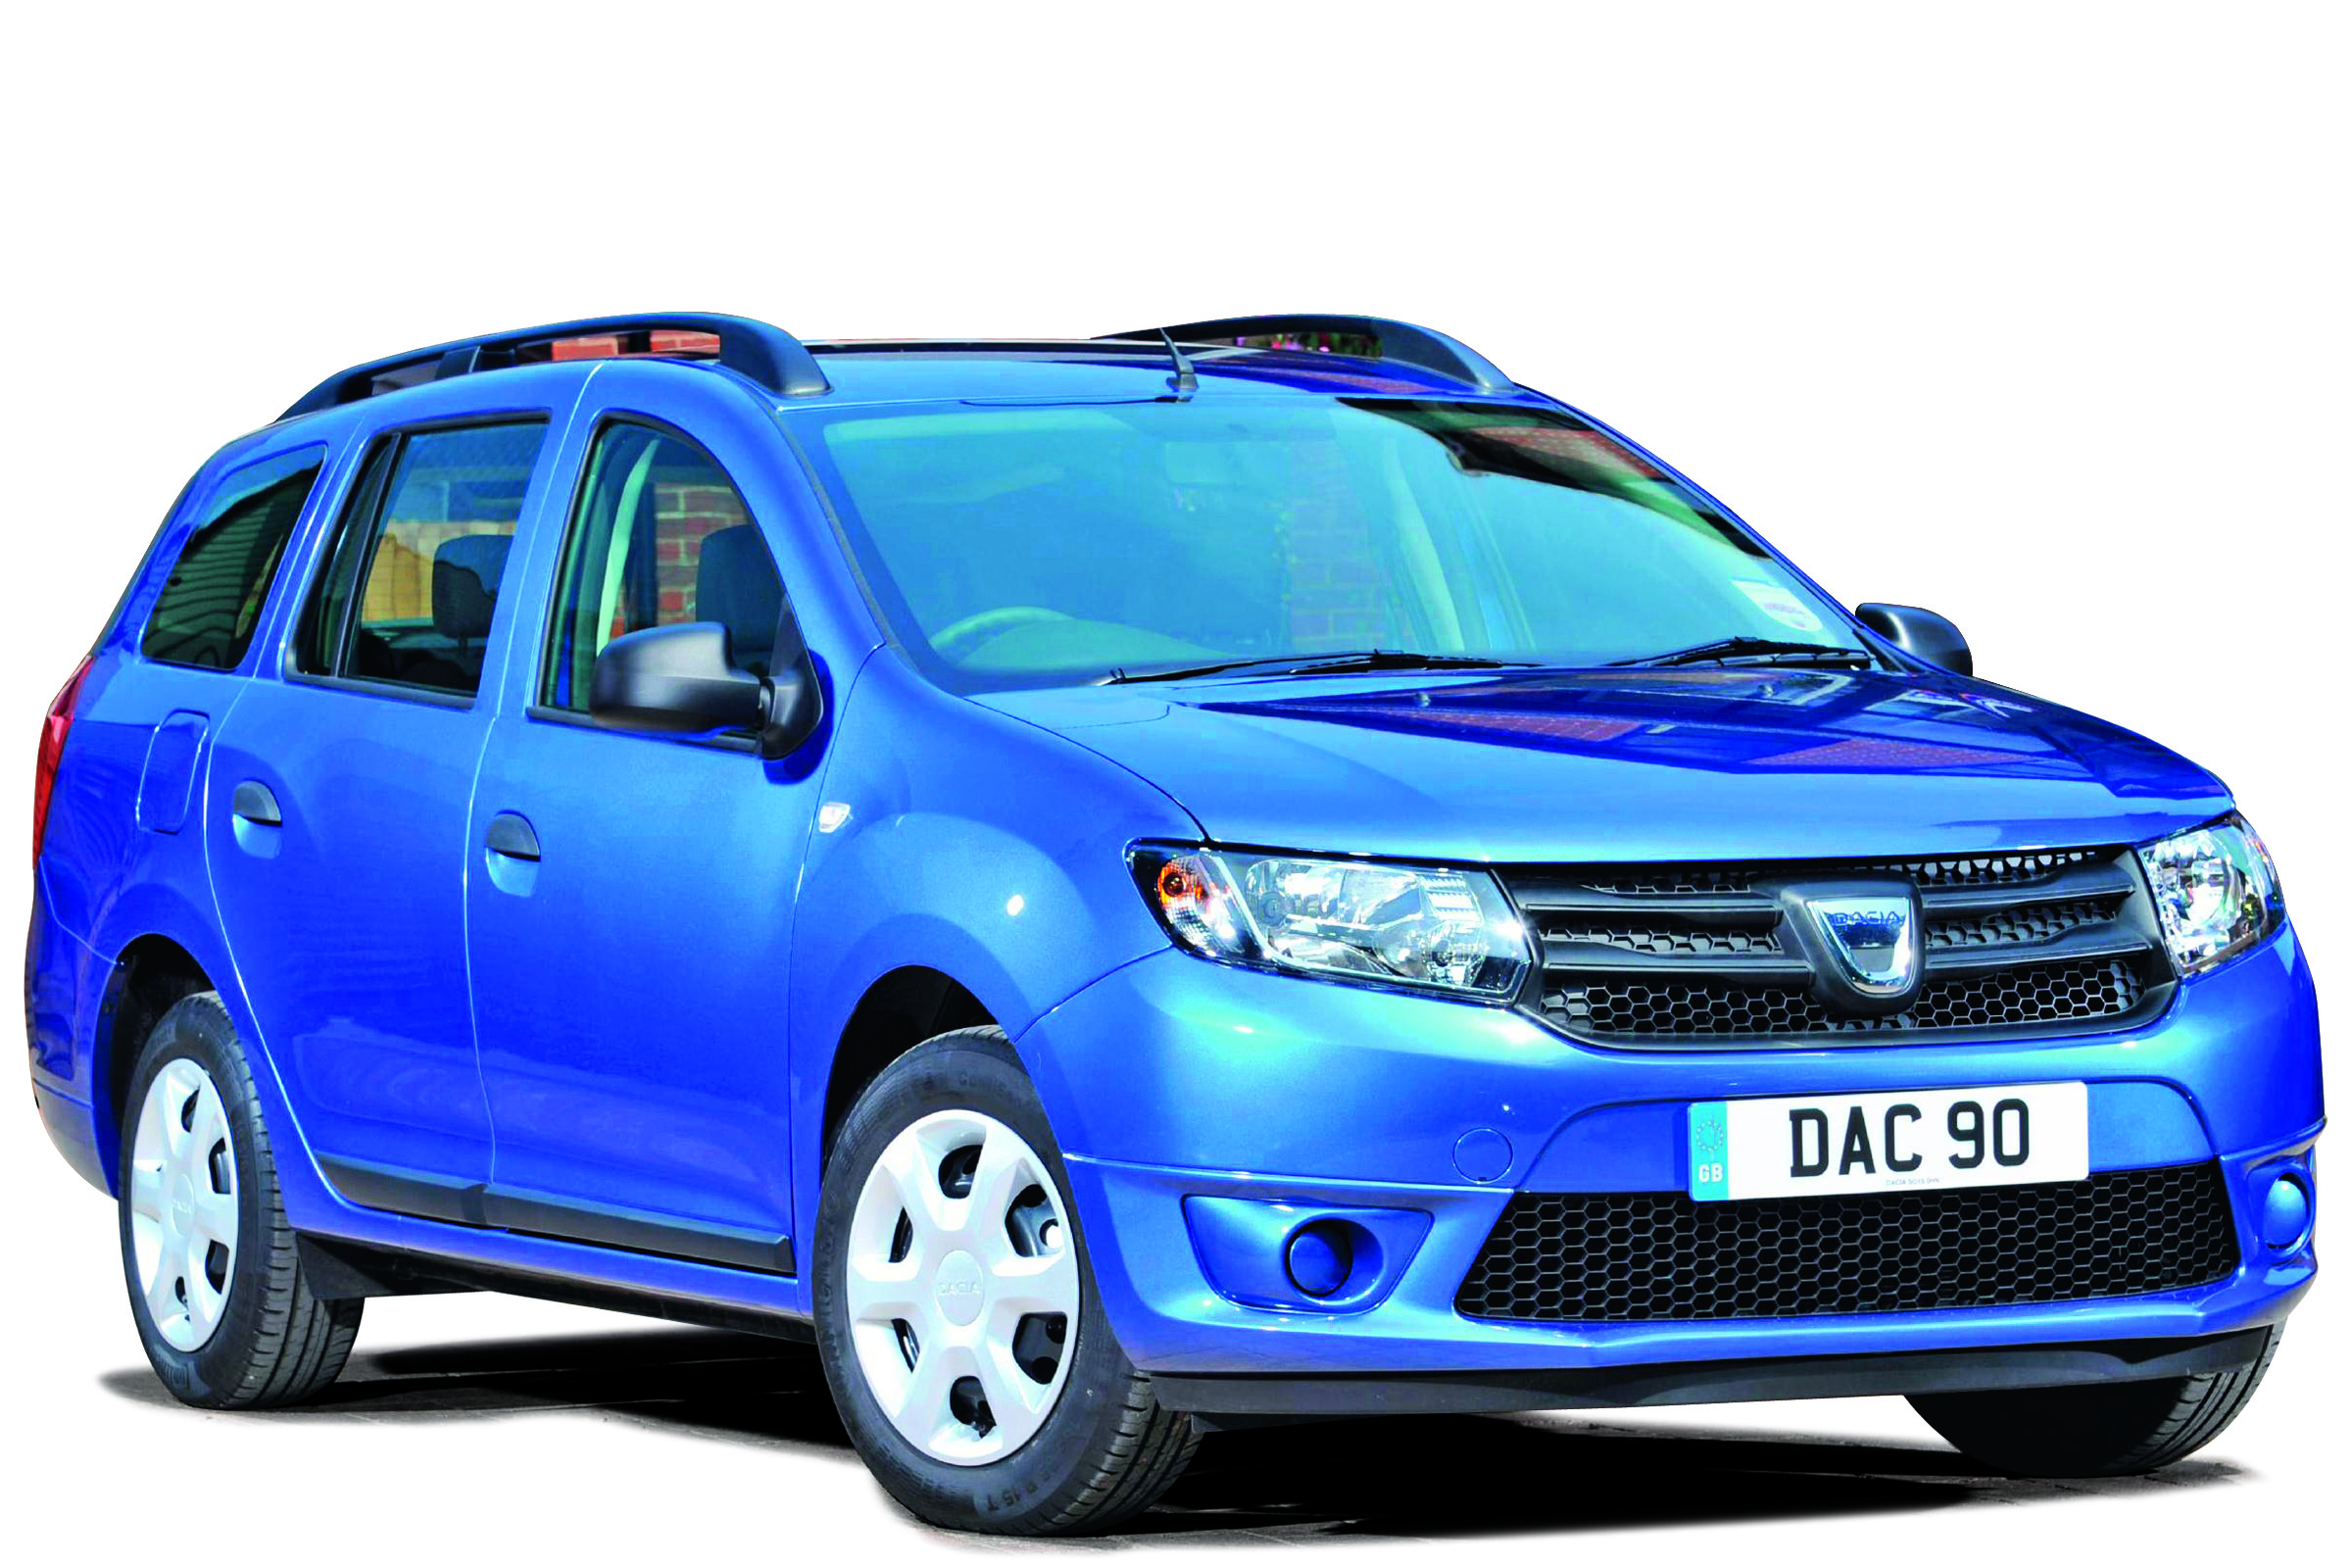 Dacia Logan Mcv Owner Reviews Mpg Problems Reliability Review Carbuyer